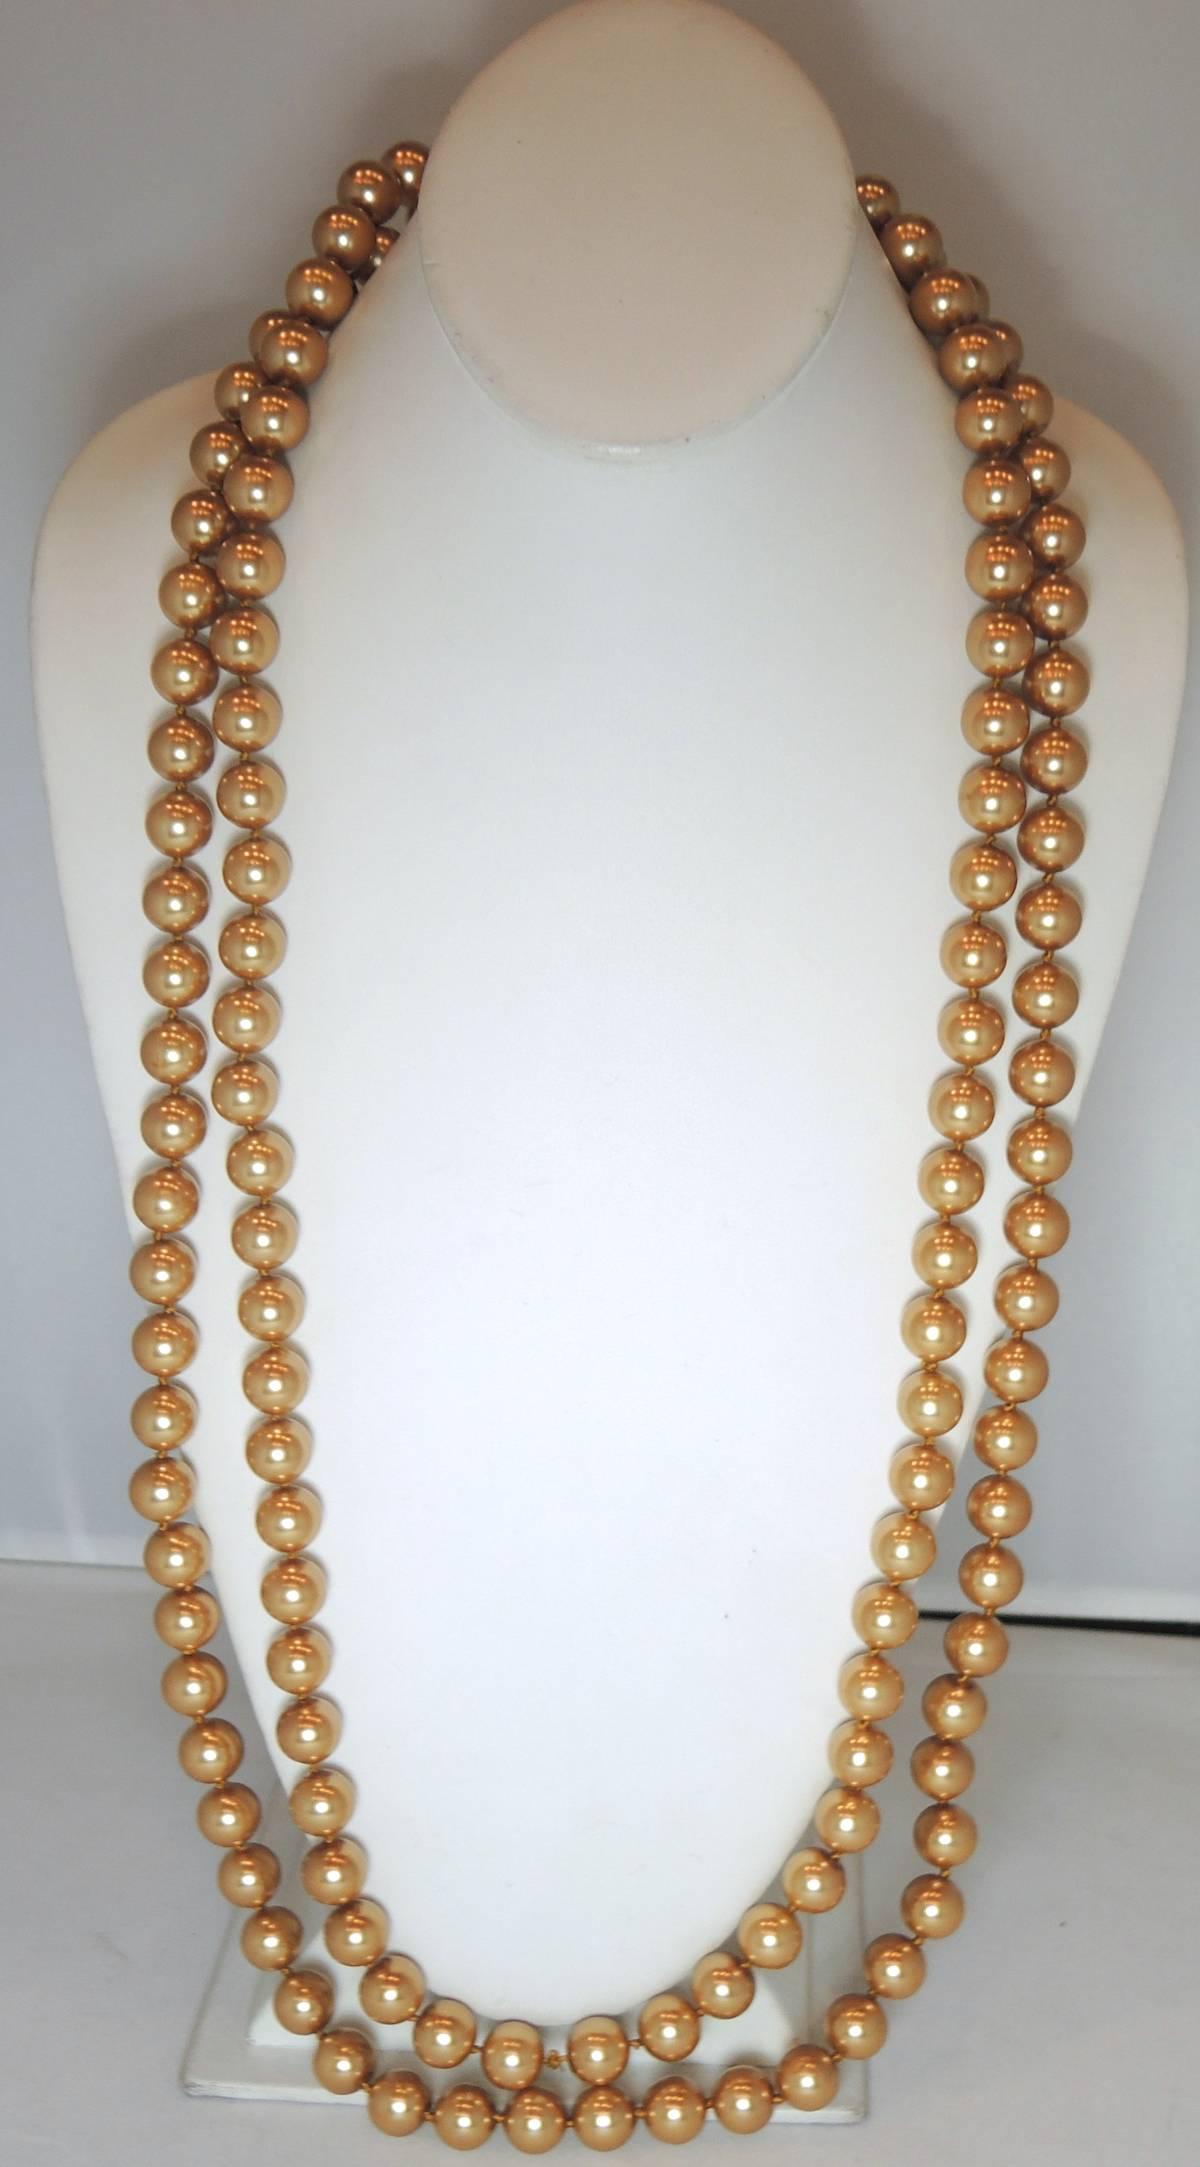 Many years ago, costume pearls were first made of glass in France and then shipped to Japan for the pearl covering.  We don’t see them too often now.  Yet, this extremely long necklace was created with faux champagne glass pearls that reminds me of